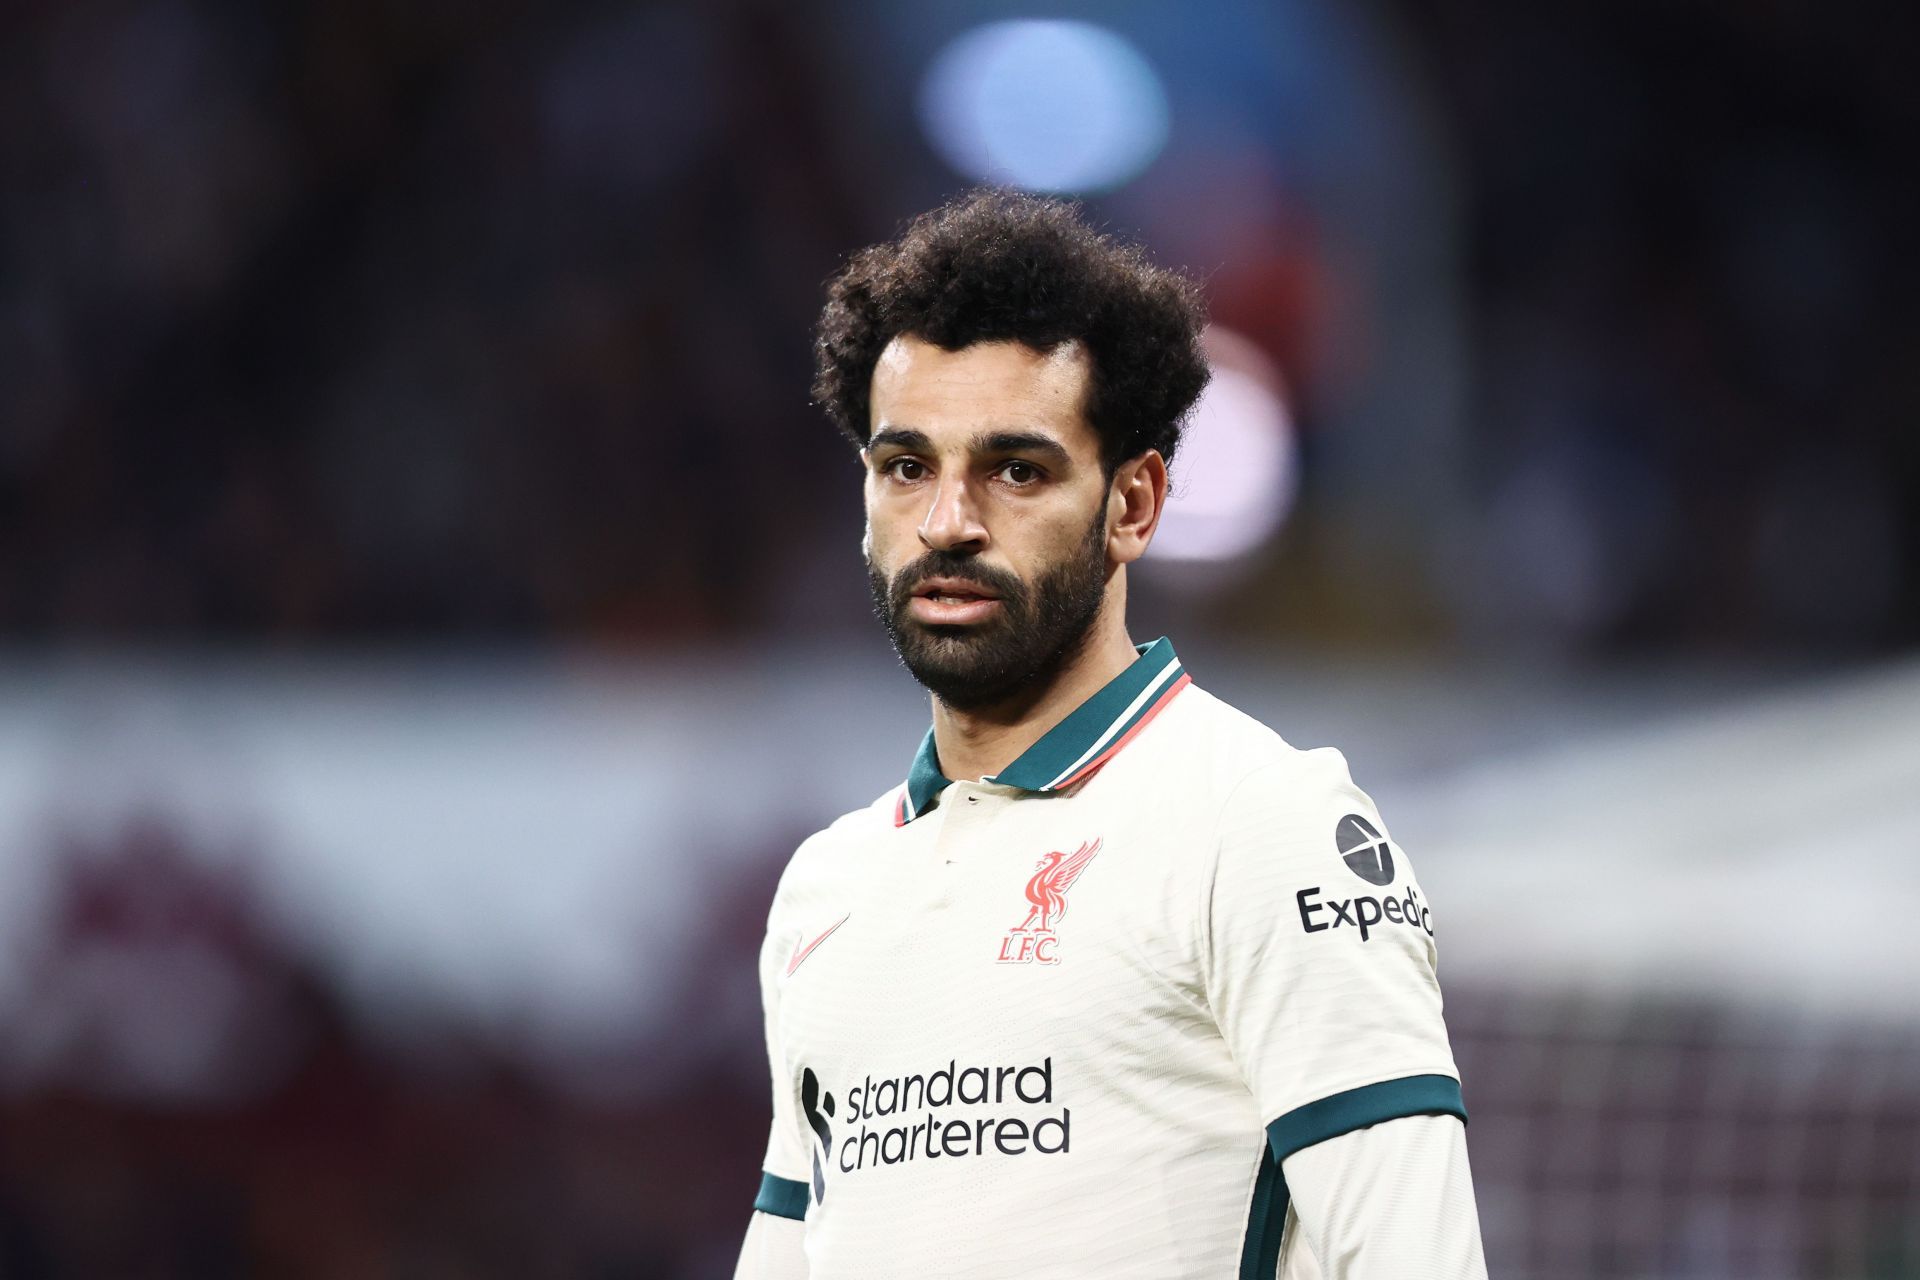 Mohamed Salah reveals who his favorite ever Liverpool player is